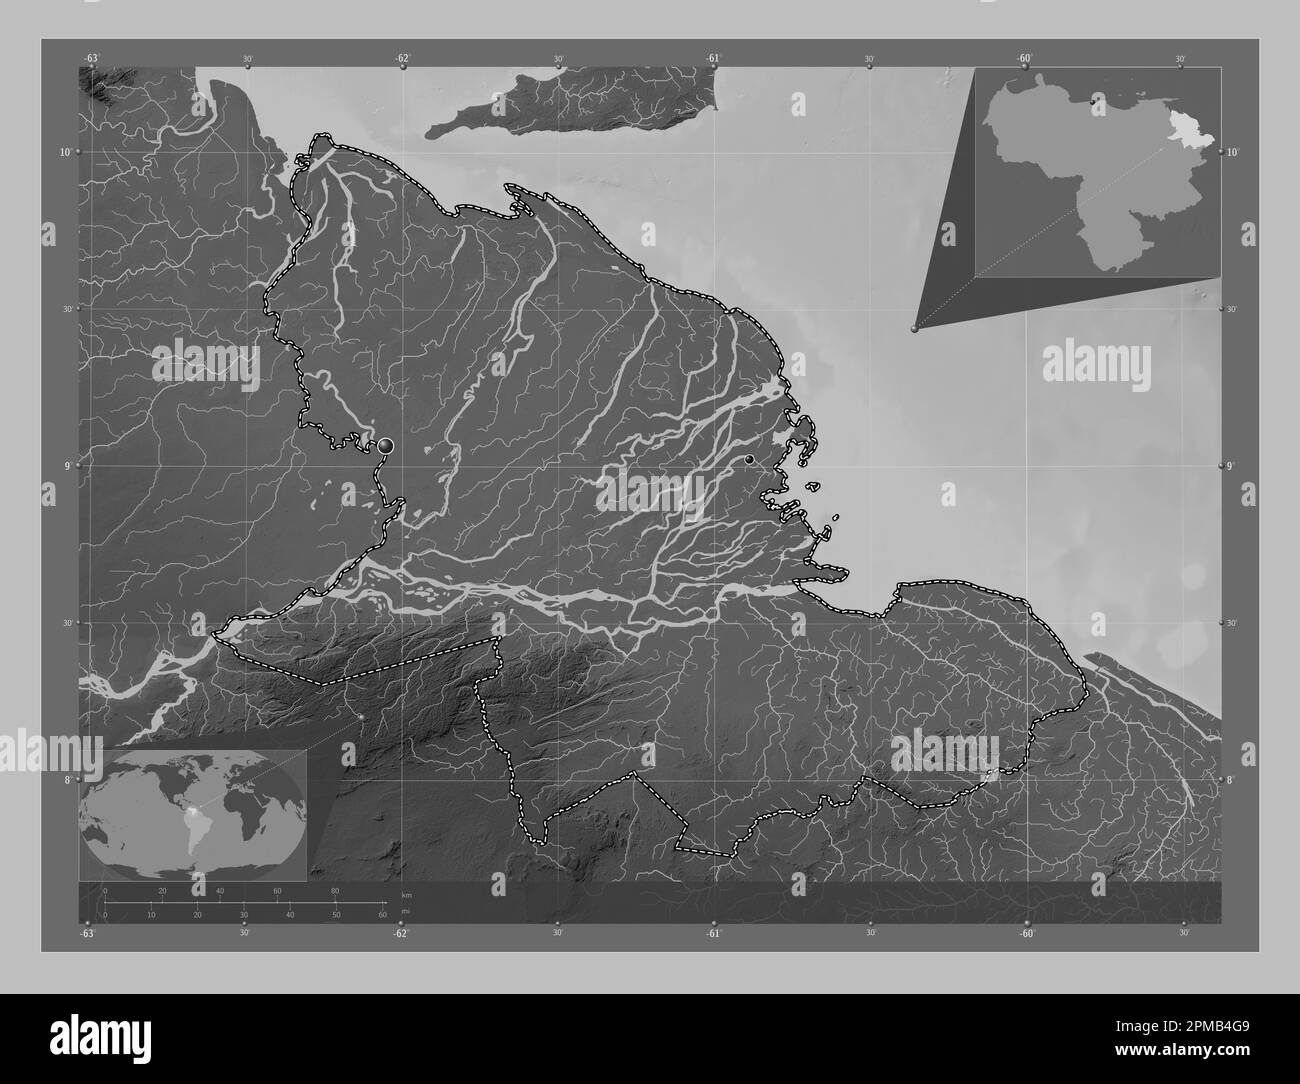 Delta Amacuro, state of Venezuela. Grayscale elevation map with lakes and rivers. Locations of major cities of the region. Corner auxiliary location m Stock Photo